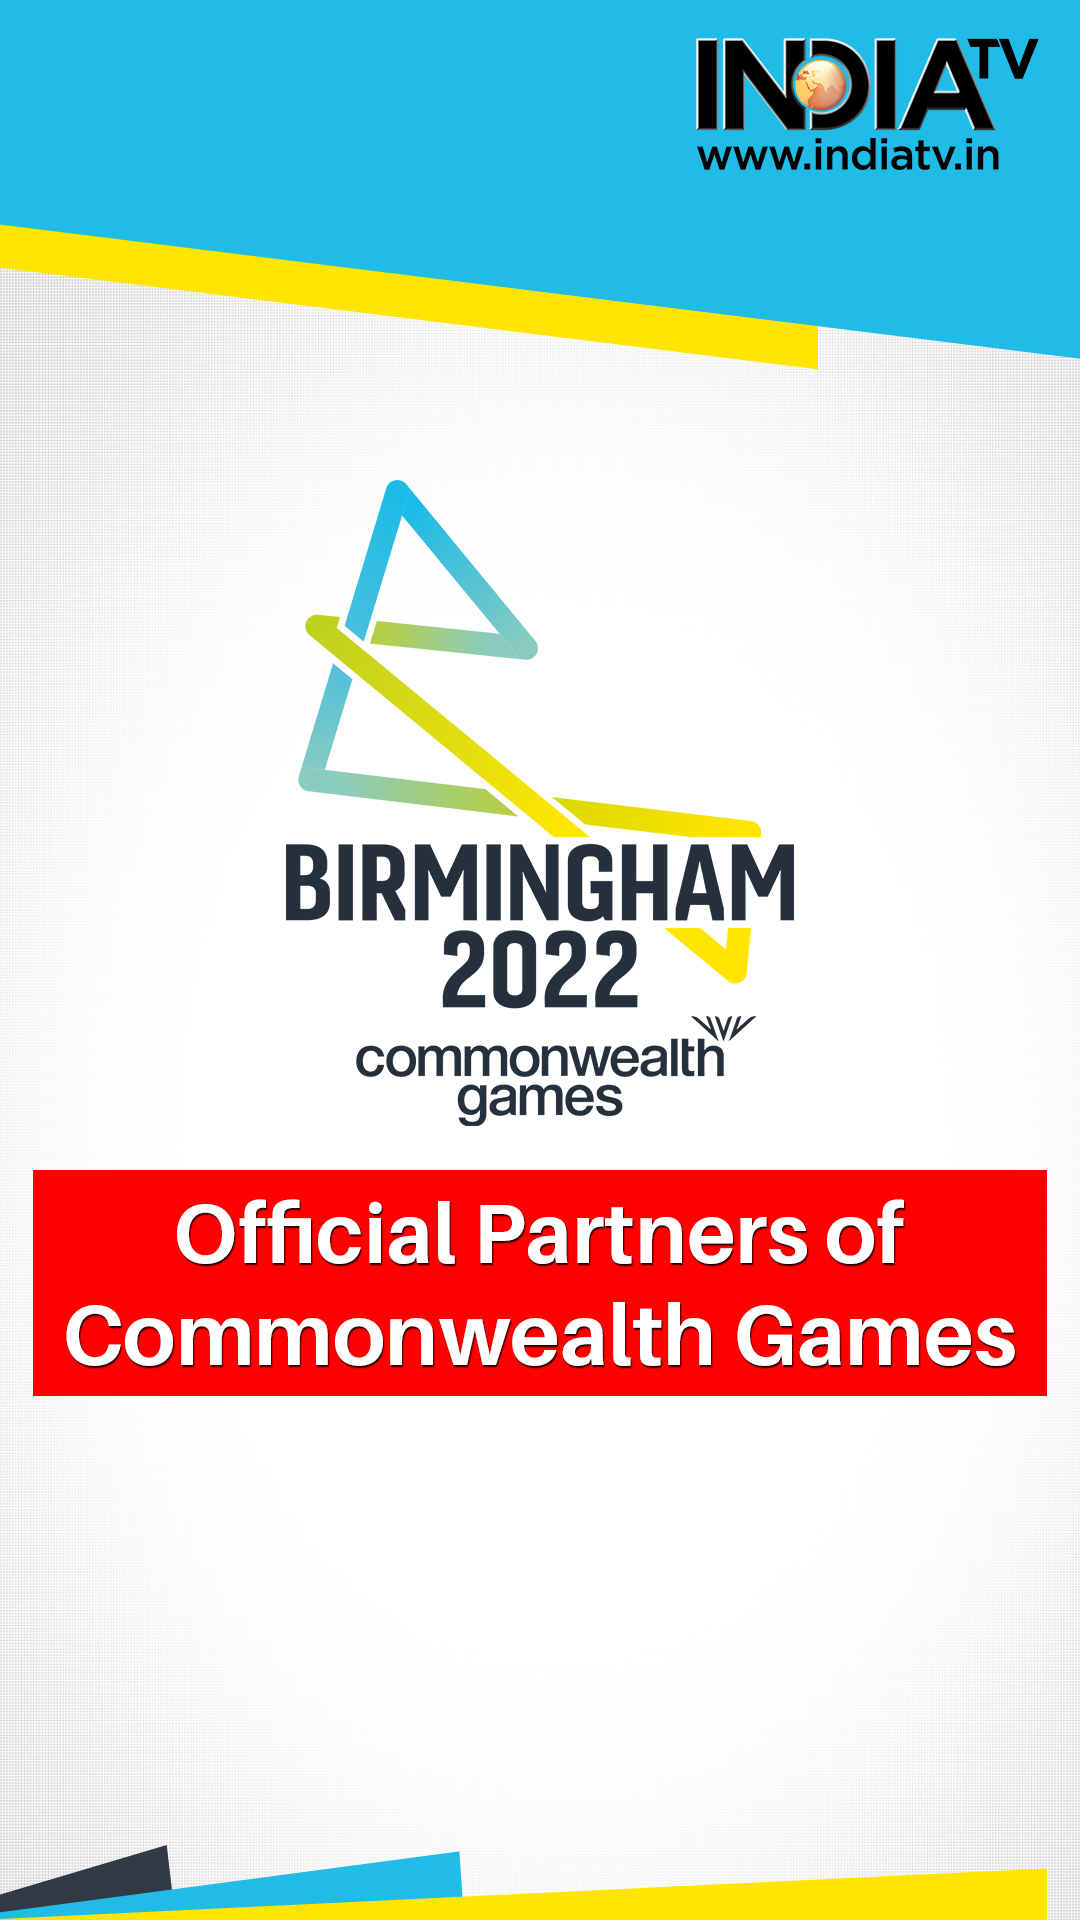 CWG 2022: Corporate giants who are an official partners for multi-nation sporting event 